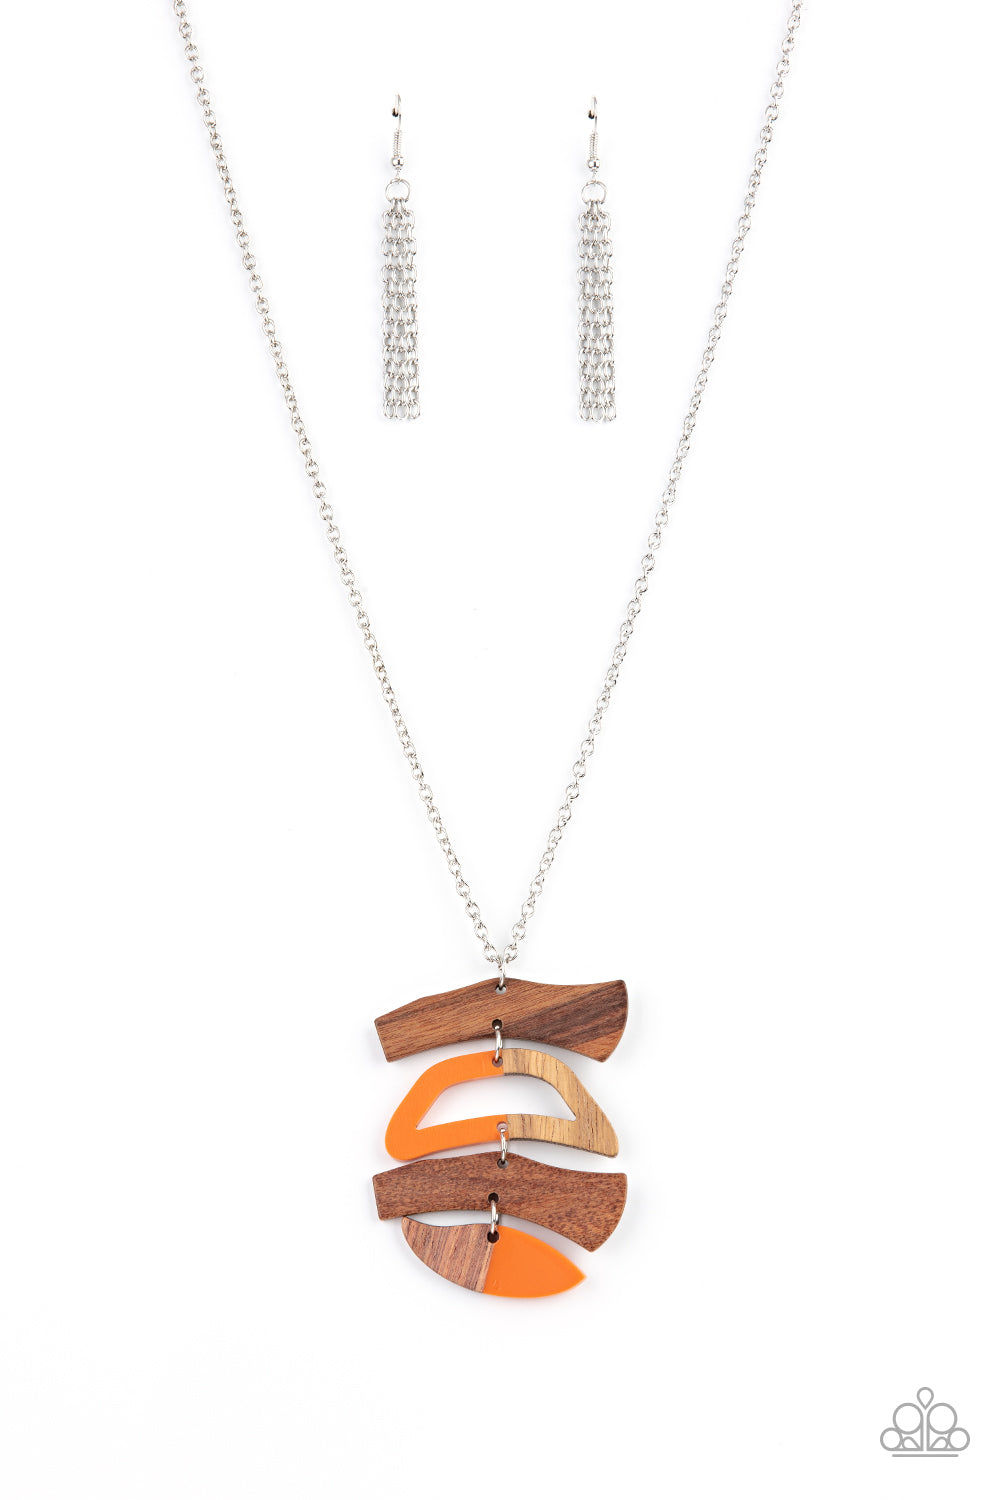 Featuring orange acrylic accents, mismatched wooden frames delicately link into an abstract pendant at the bottom of a lengthened silver chain for an earthy fashion. 